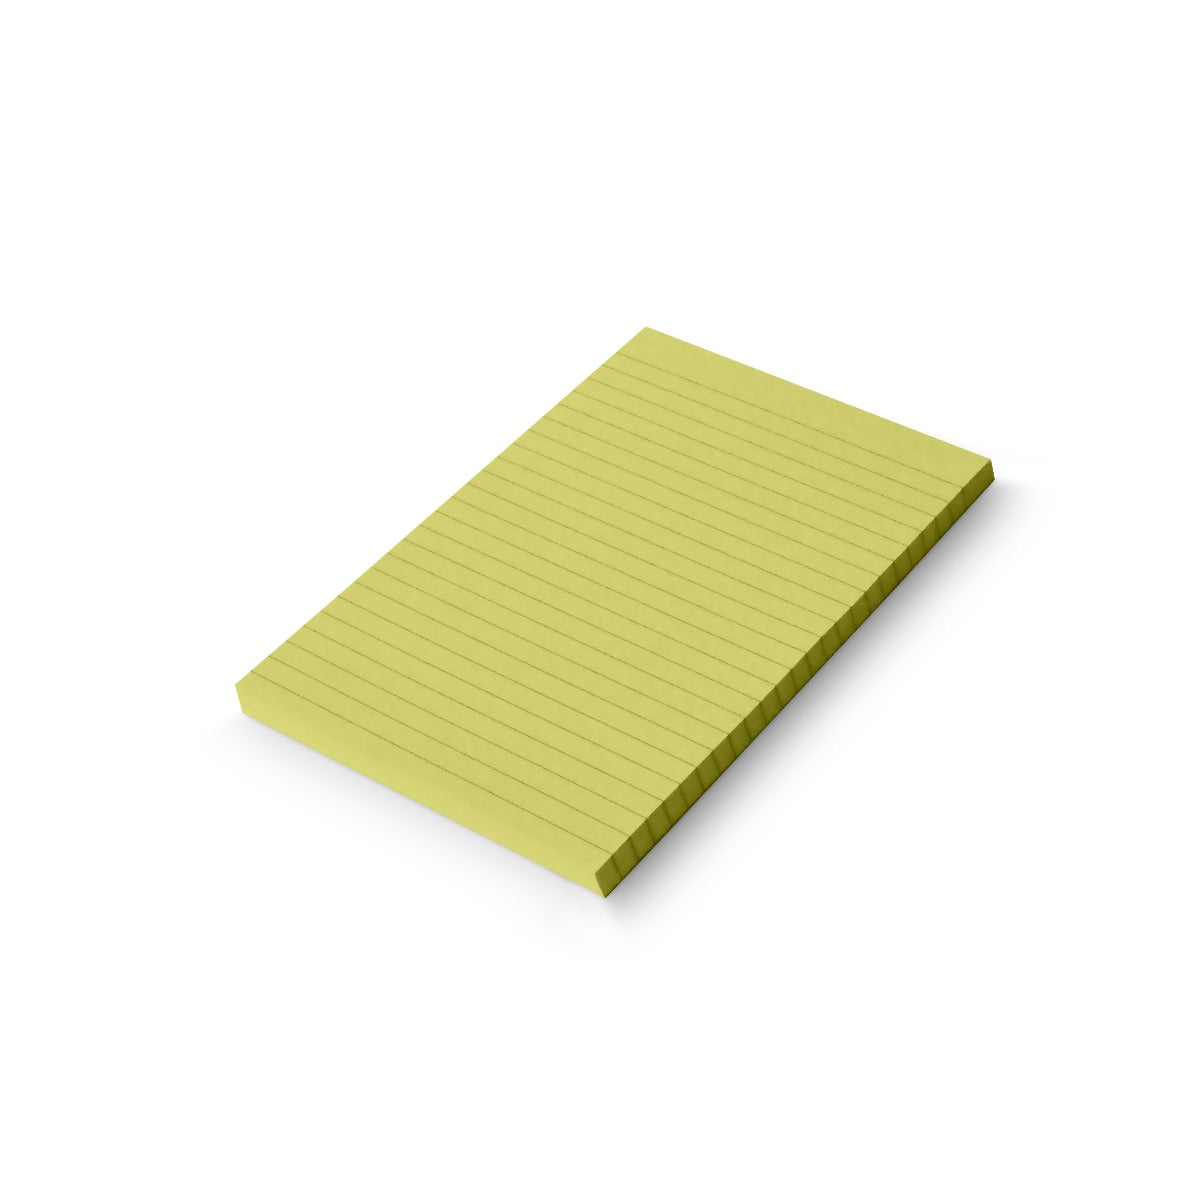 A5 8mm Lined Coloured Paper Refill Pad